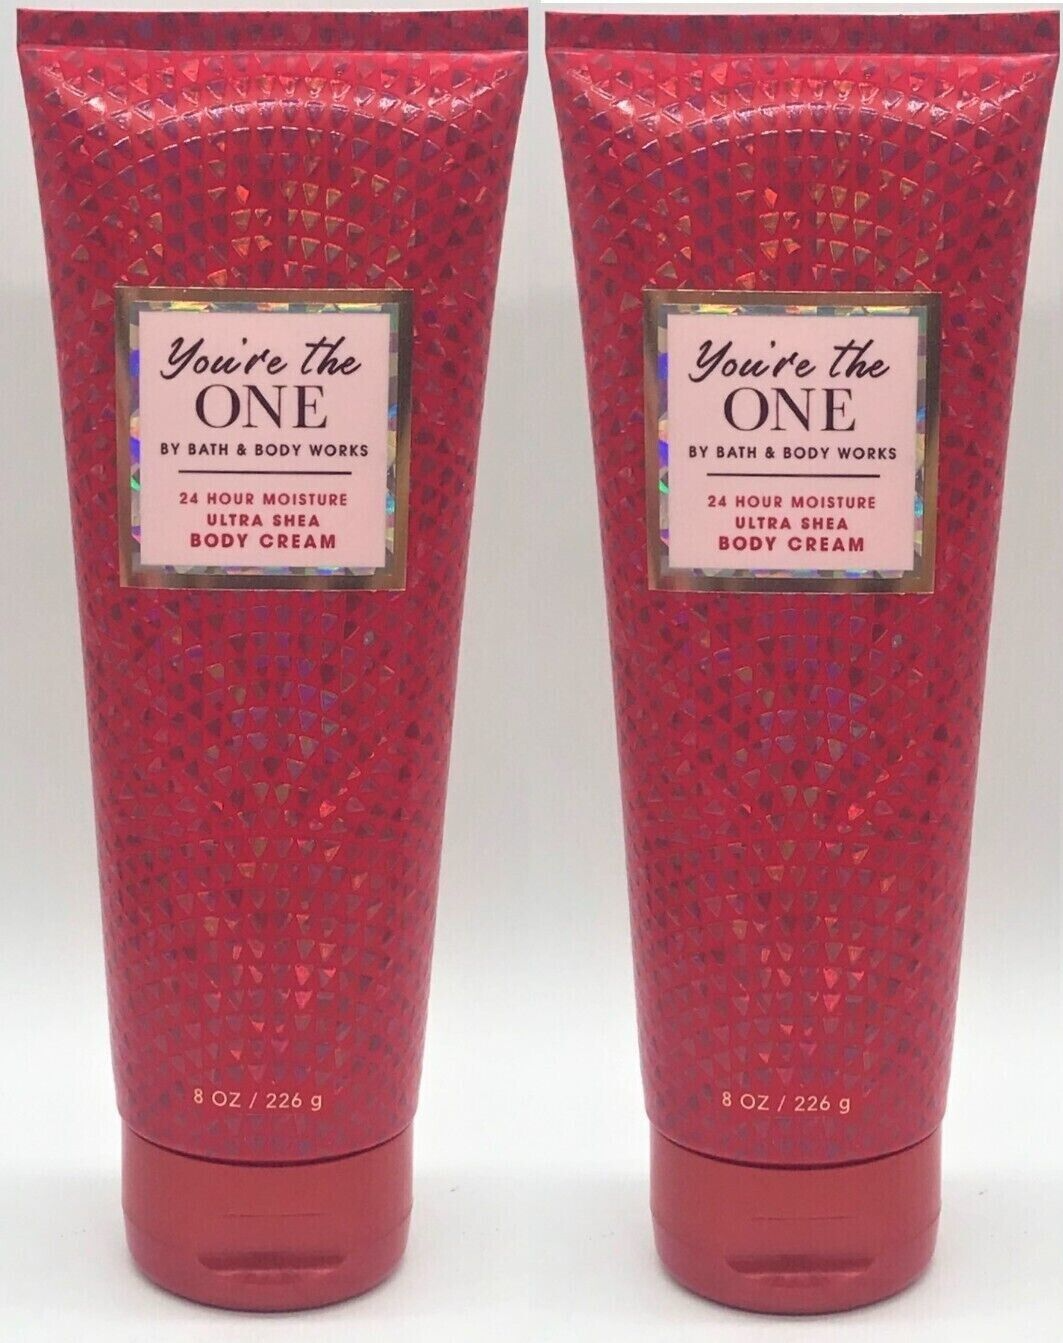 Primary image for 2 YOU'RE THE ONE Bath & Body Works 24 Hr Moisture Ultra Shea Body Cream 8oz New